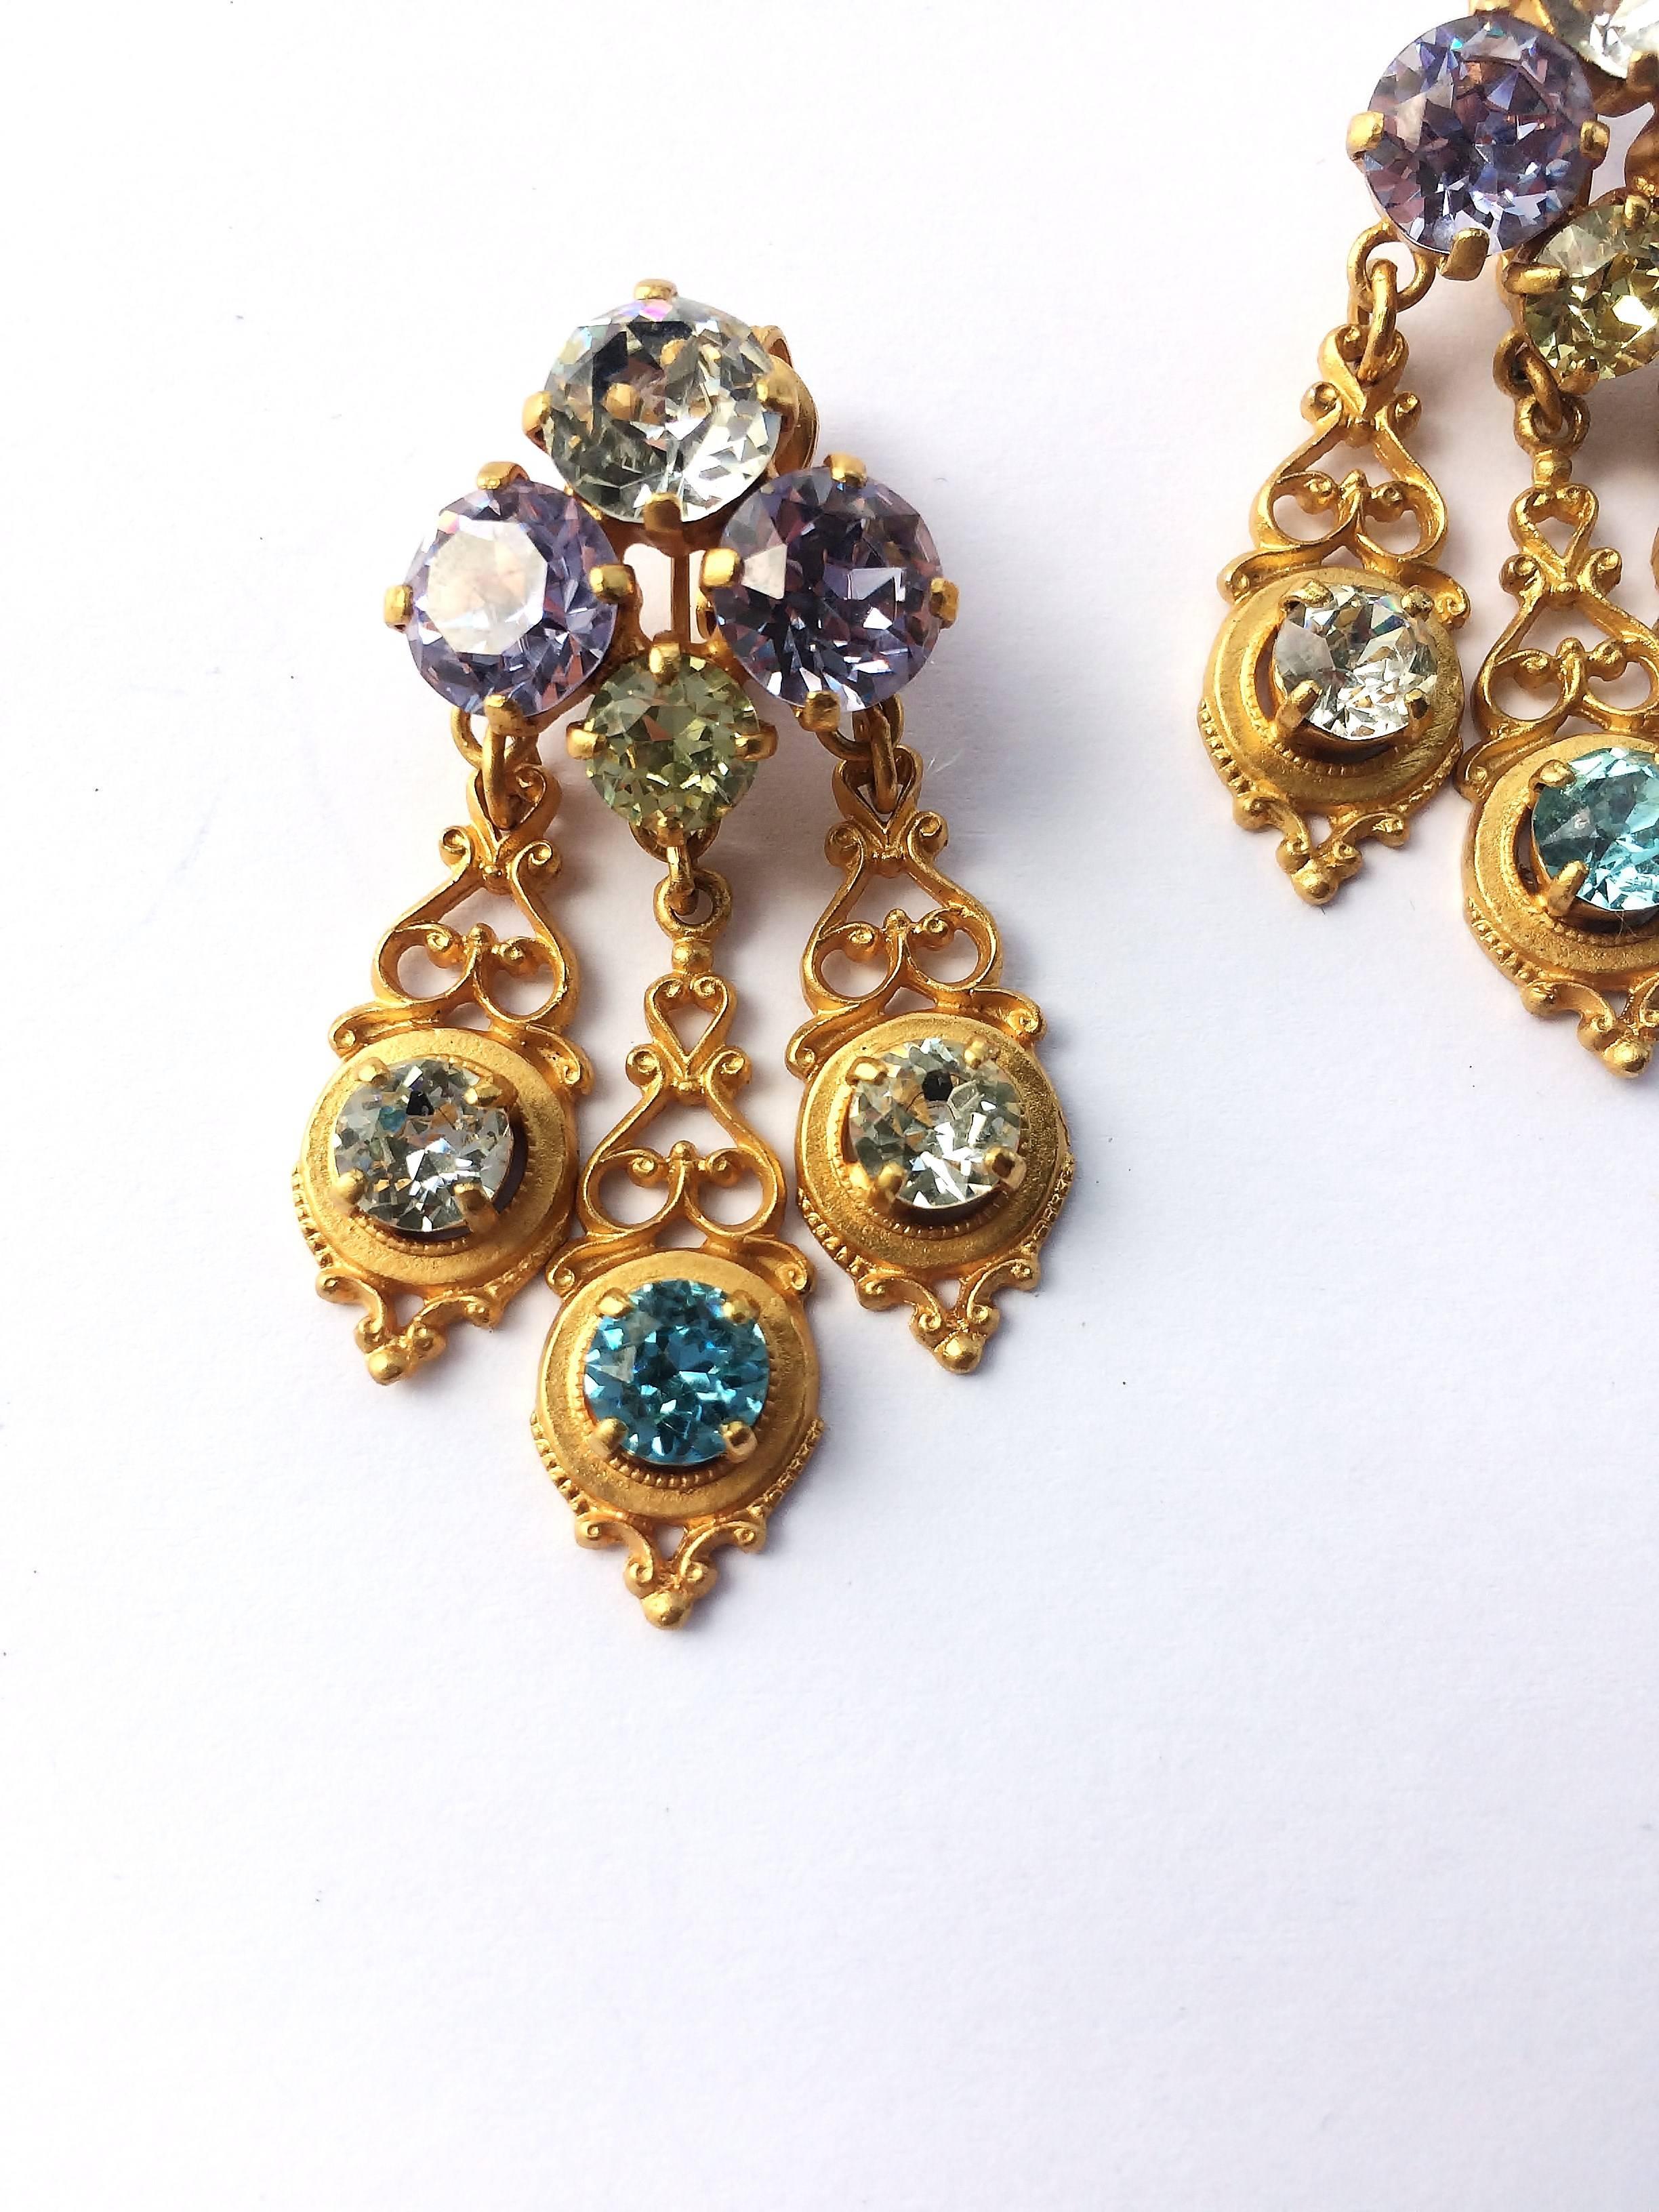 Beautiful baroque drop earrings, in soft, pastel colours, a magical combination, set in gilded metal. These are a very well known Dior design from the early 1950s, but they are not marked. (In many cases, the either the necklace, or brooch/bracelet